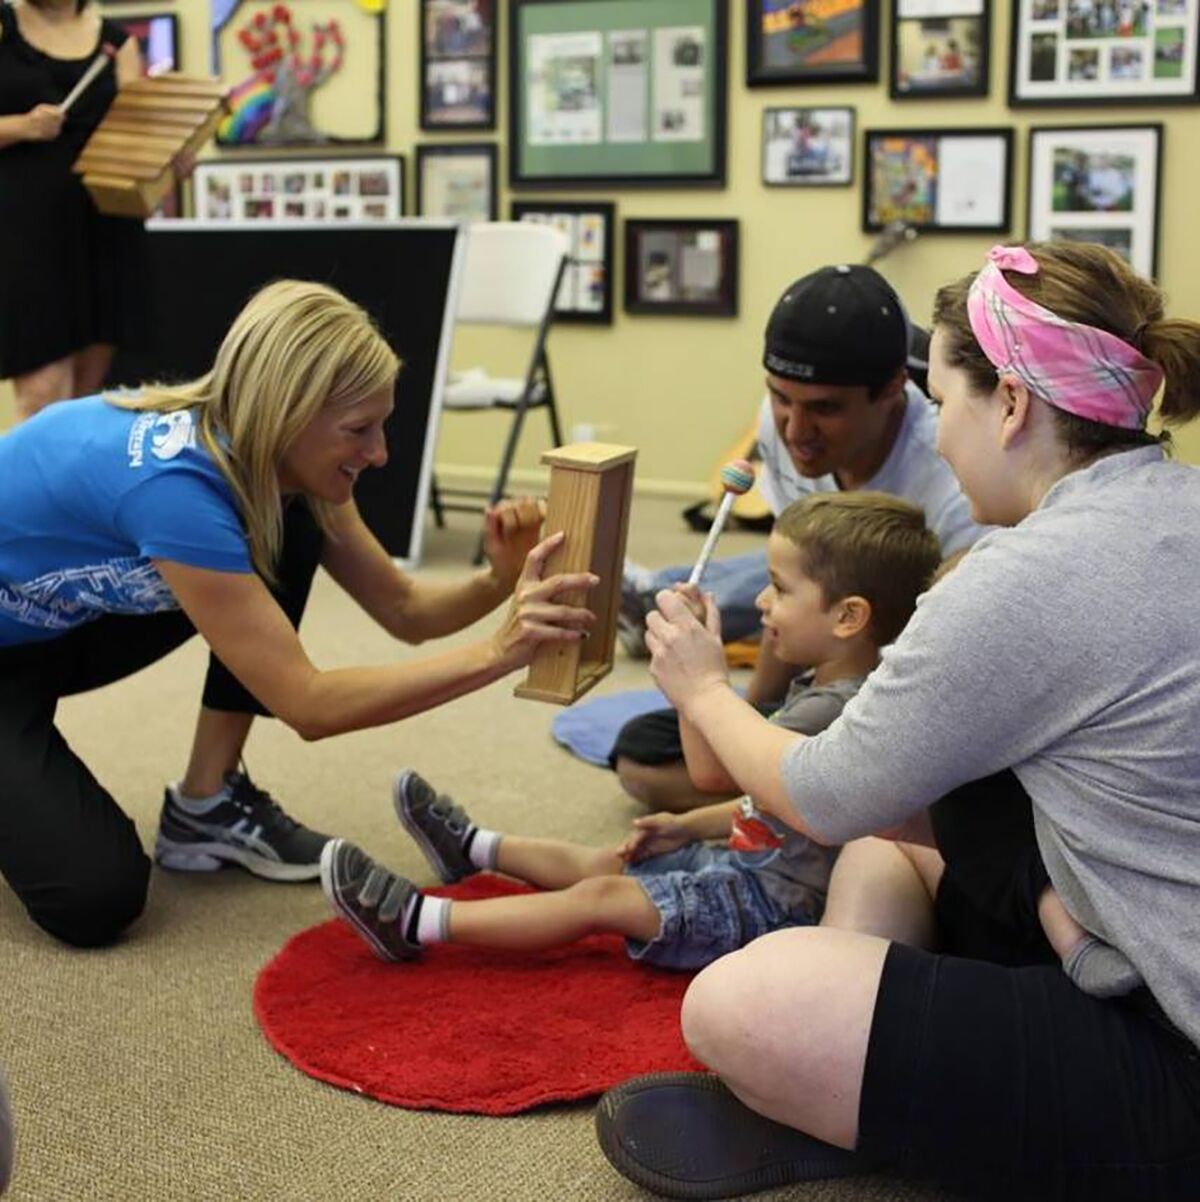 Therapist Julie Guy (left) works with a family at a musical playgroup hosted by the Autism Tree Project Foundation.